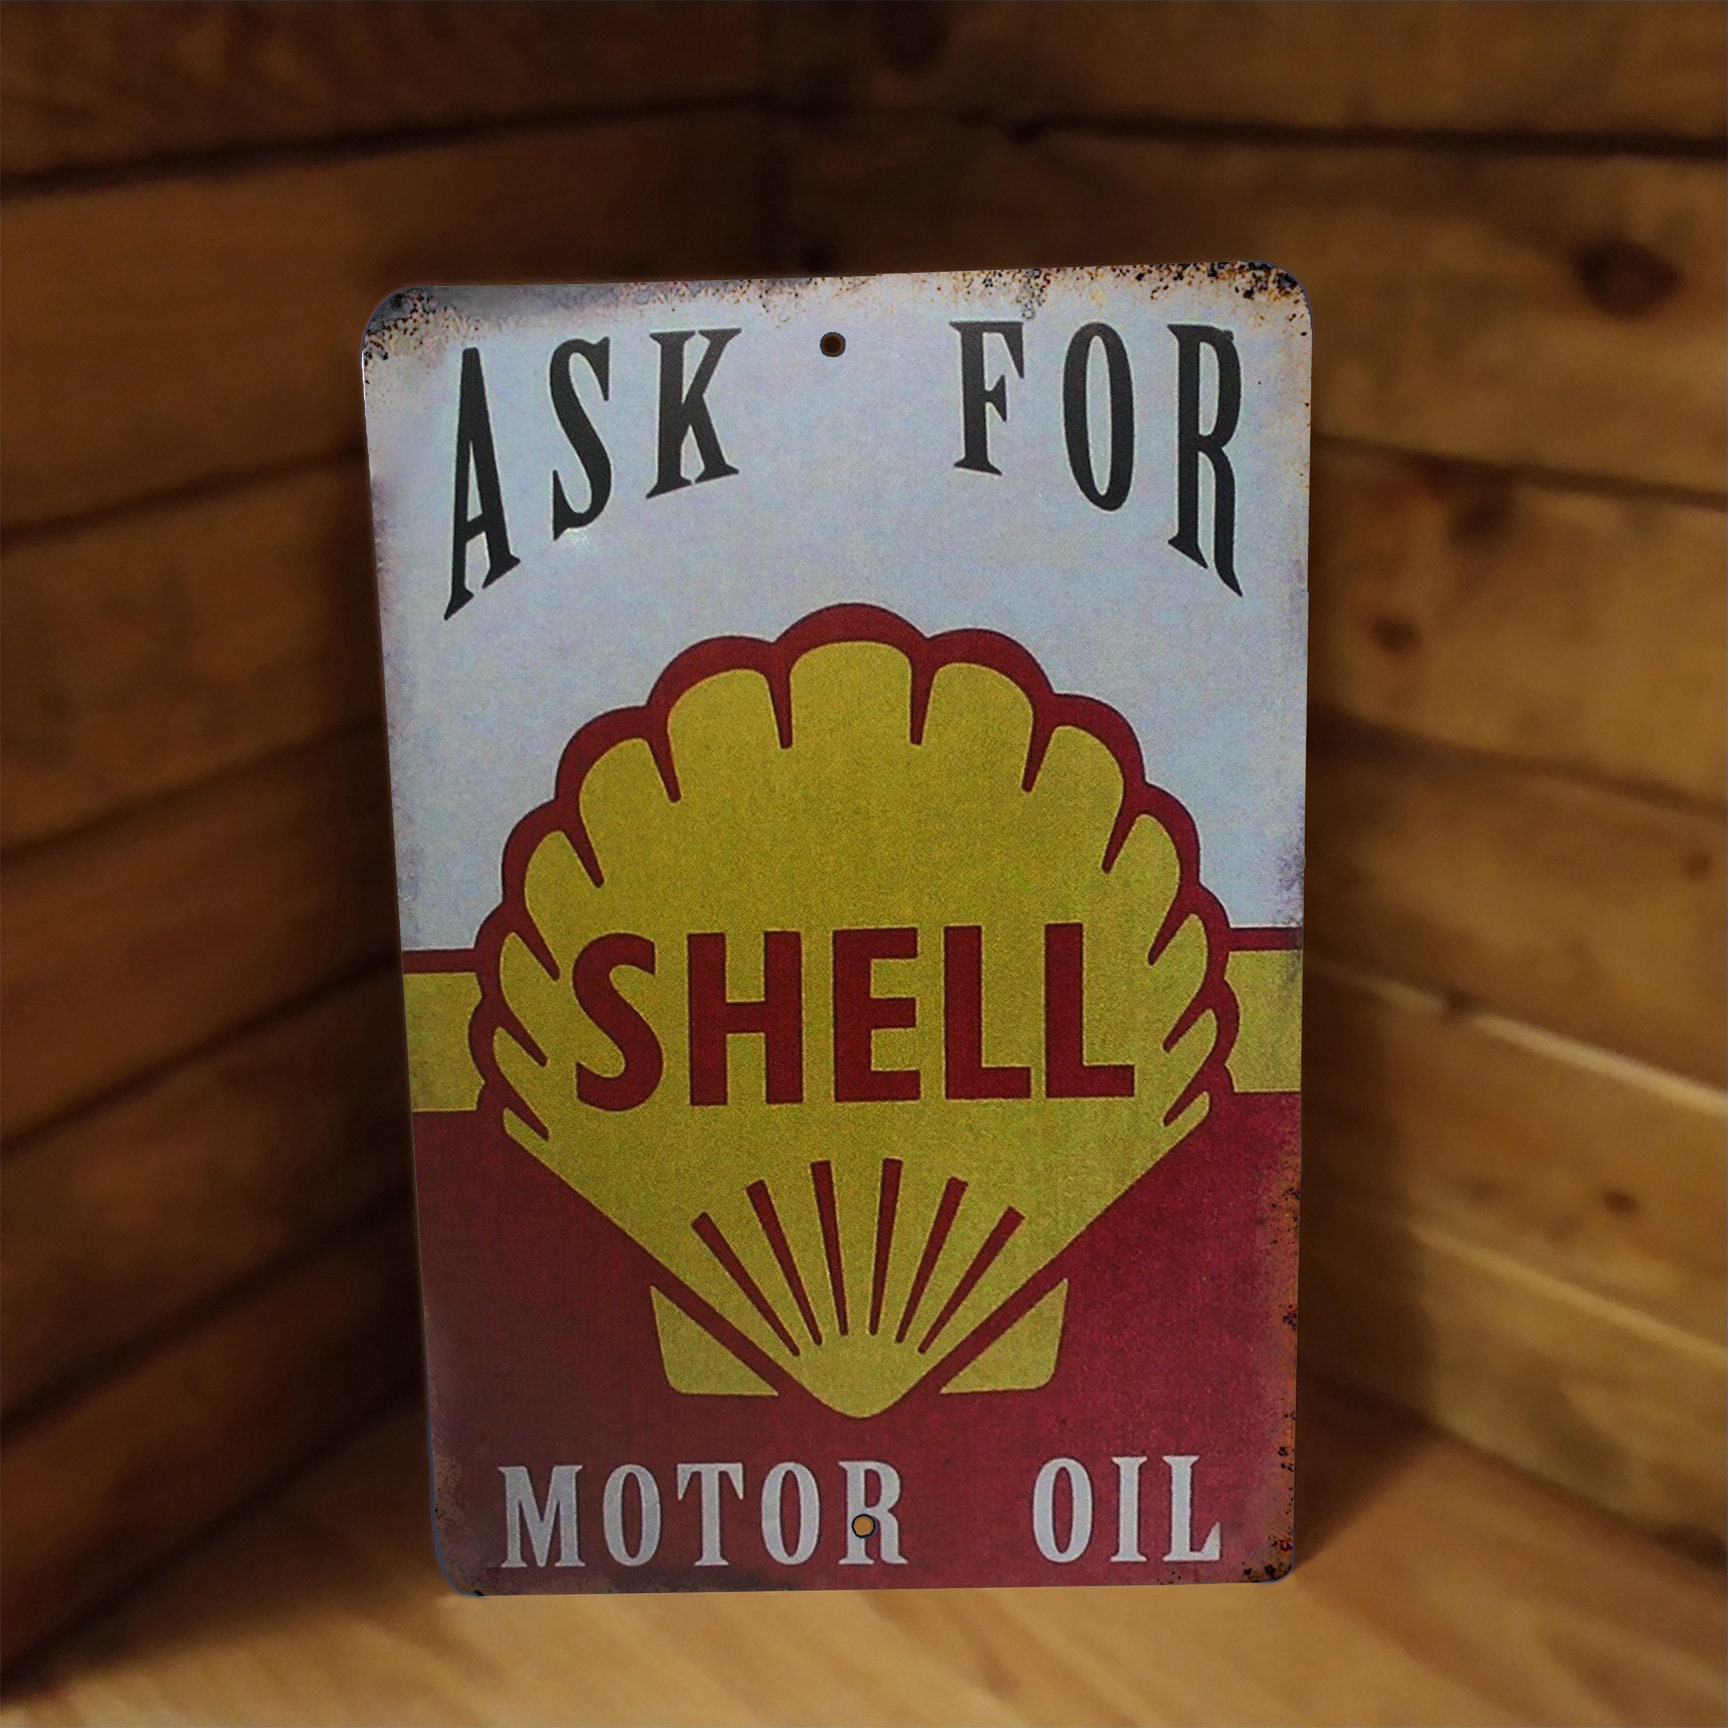 old shell signs